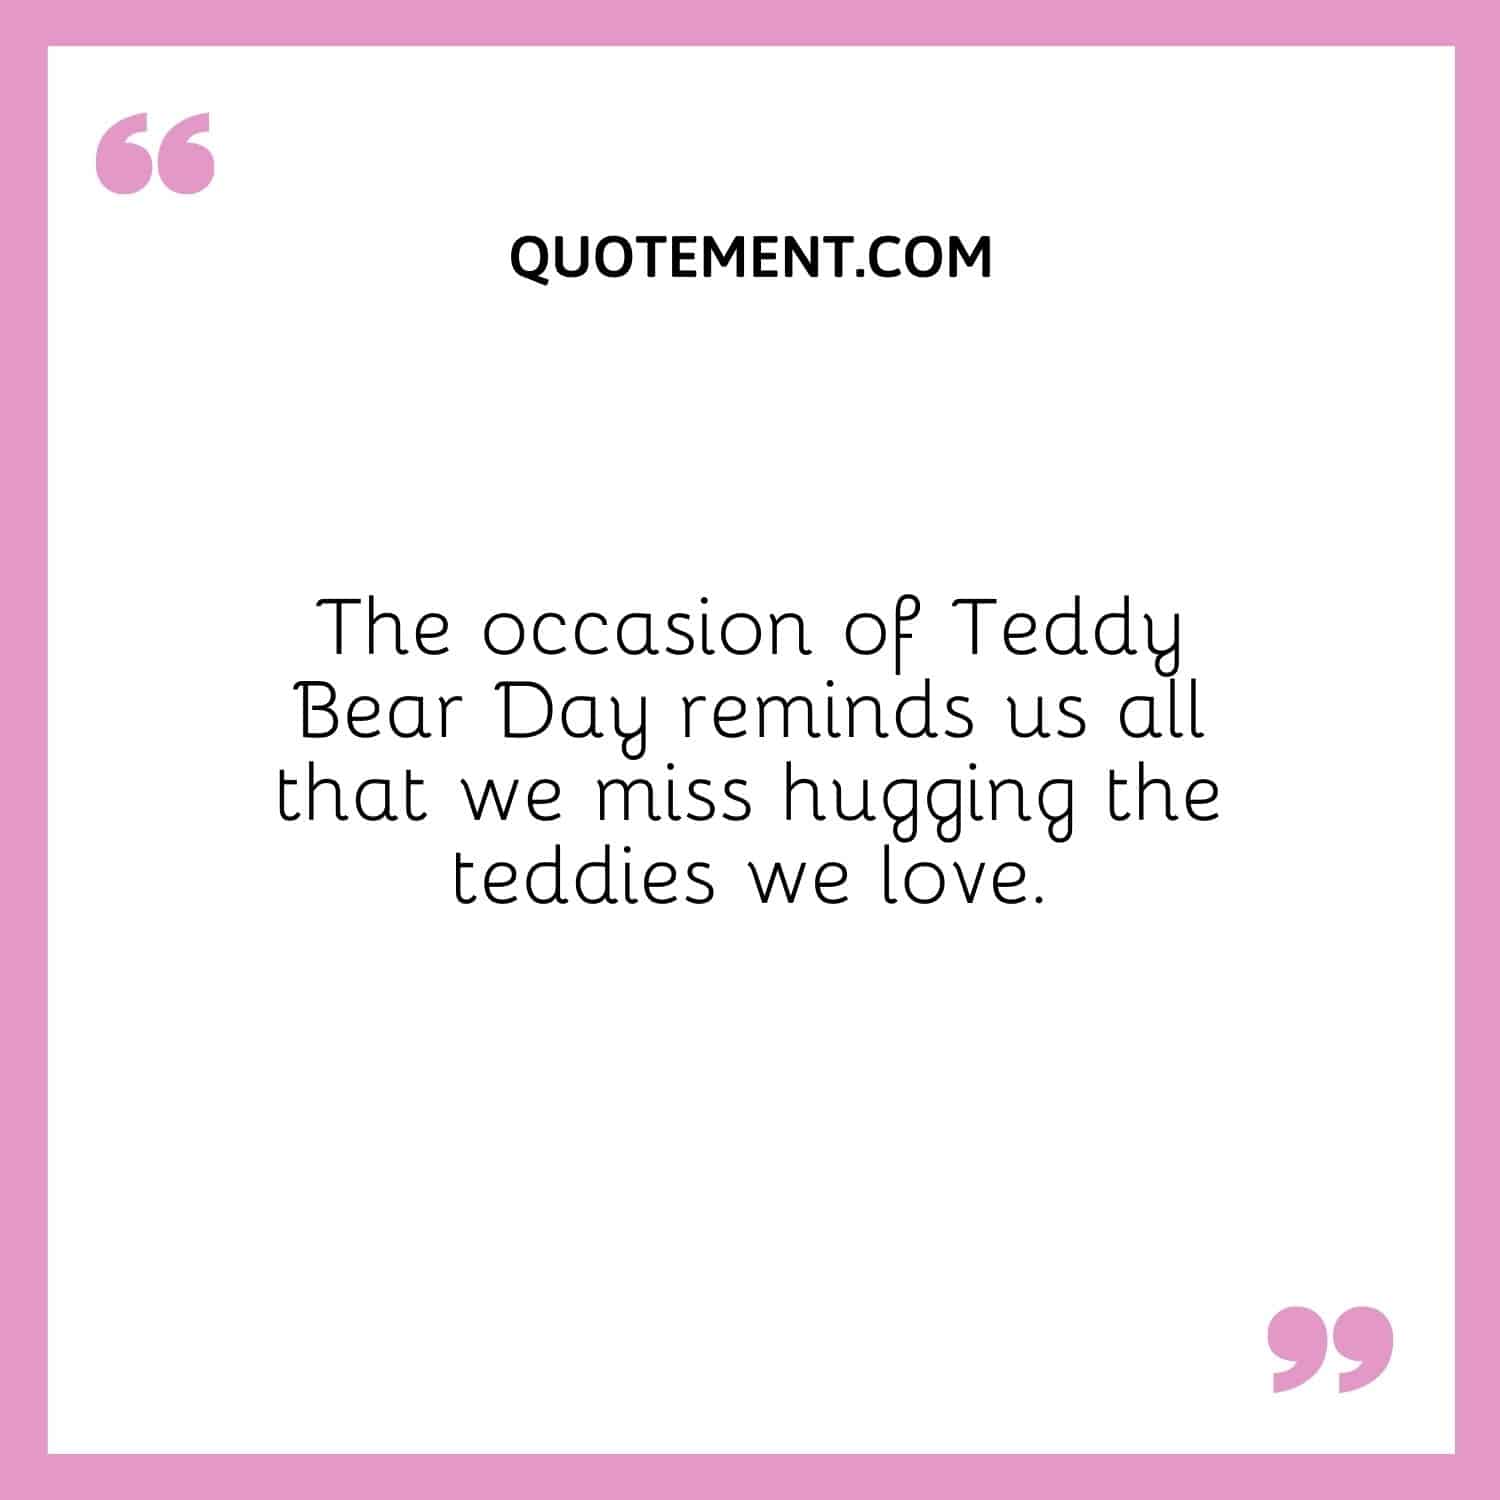 The occasion of Teddy Bear Day